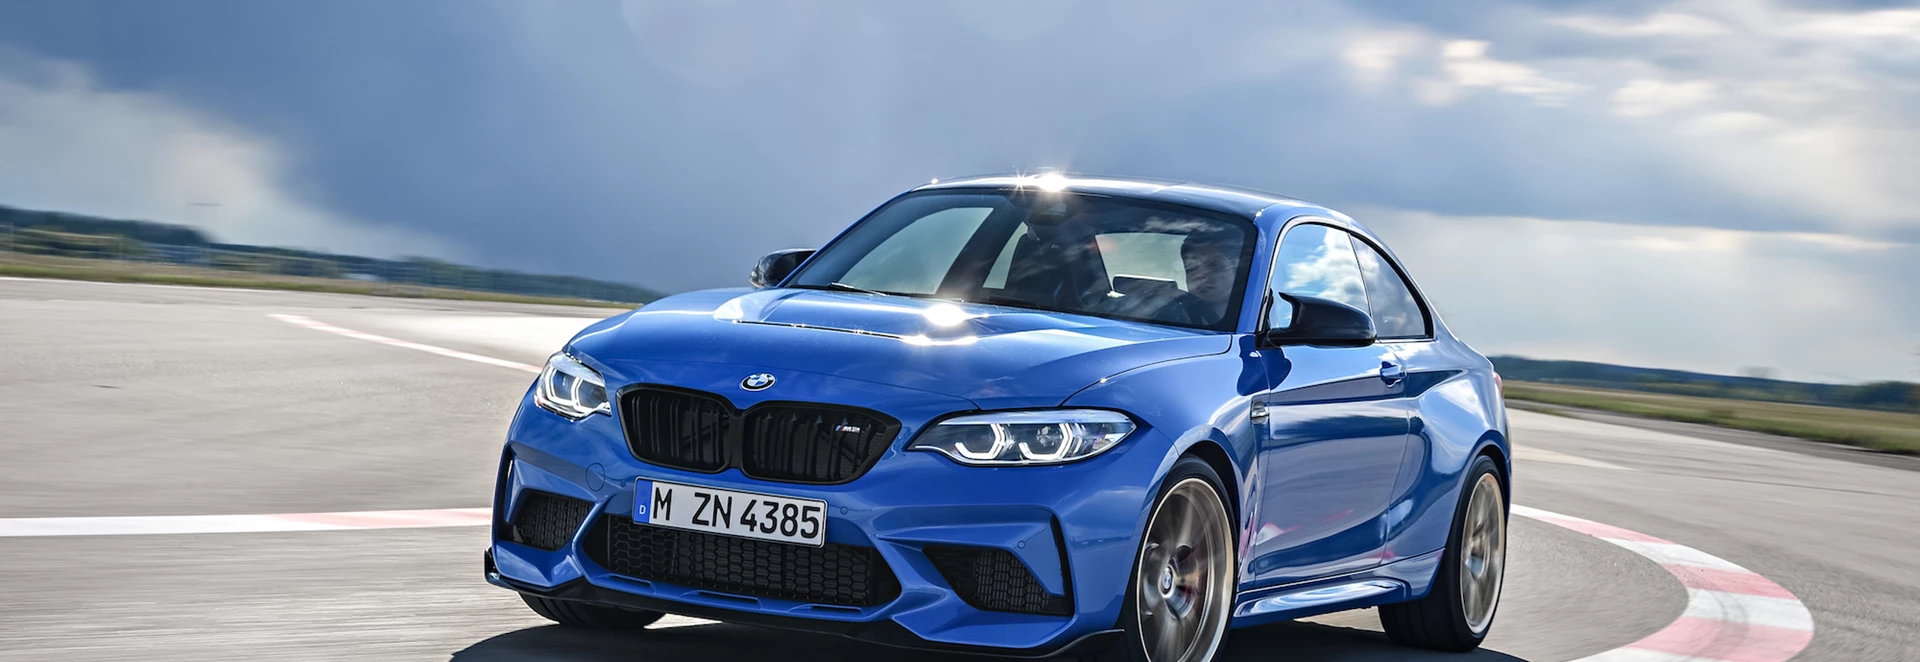 2020 BMW M2 CS is a swansong for a performance monster